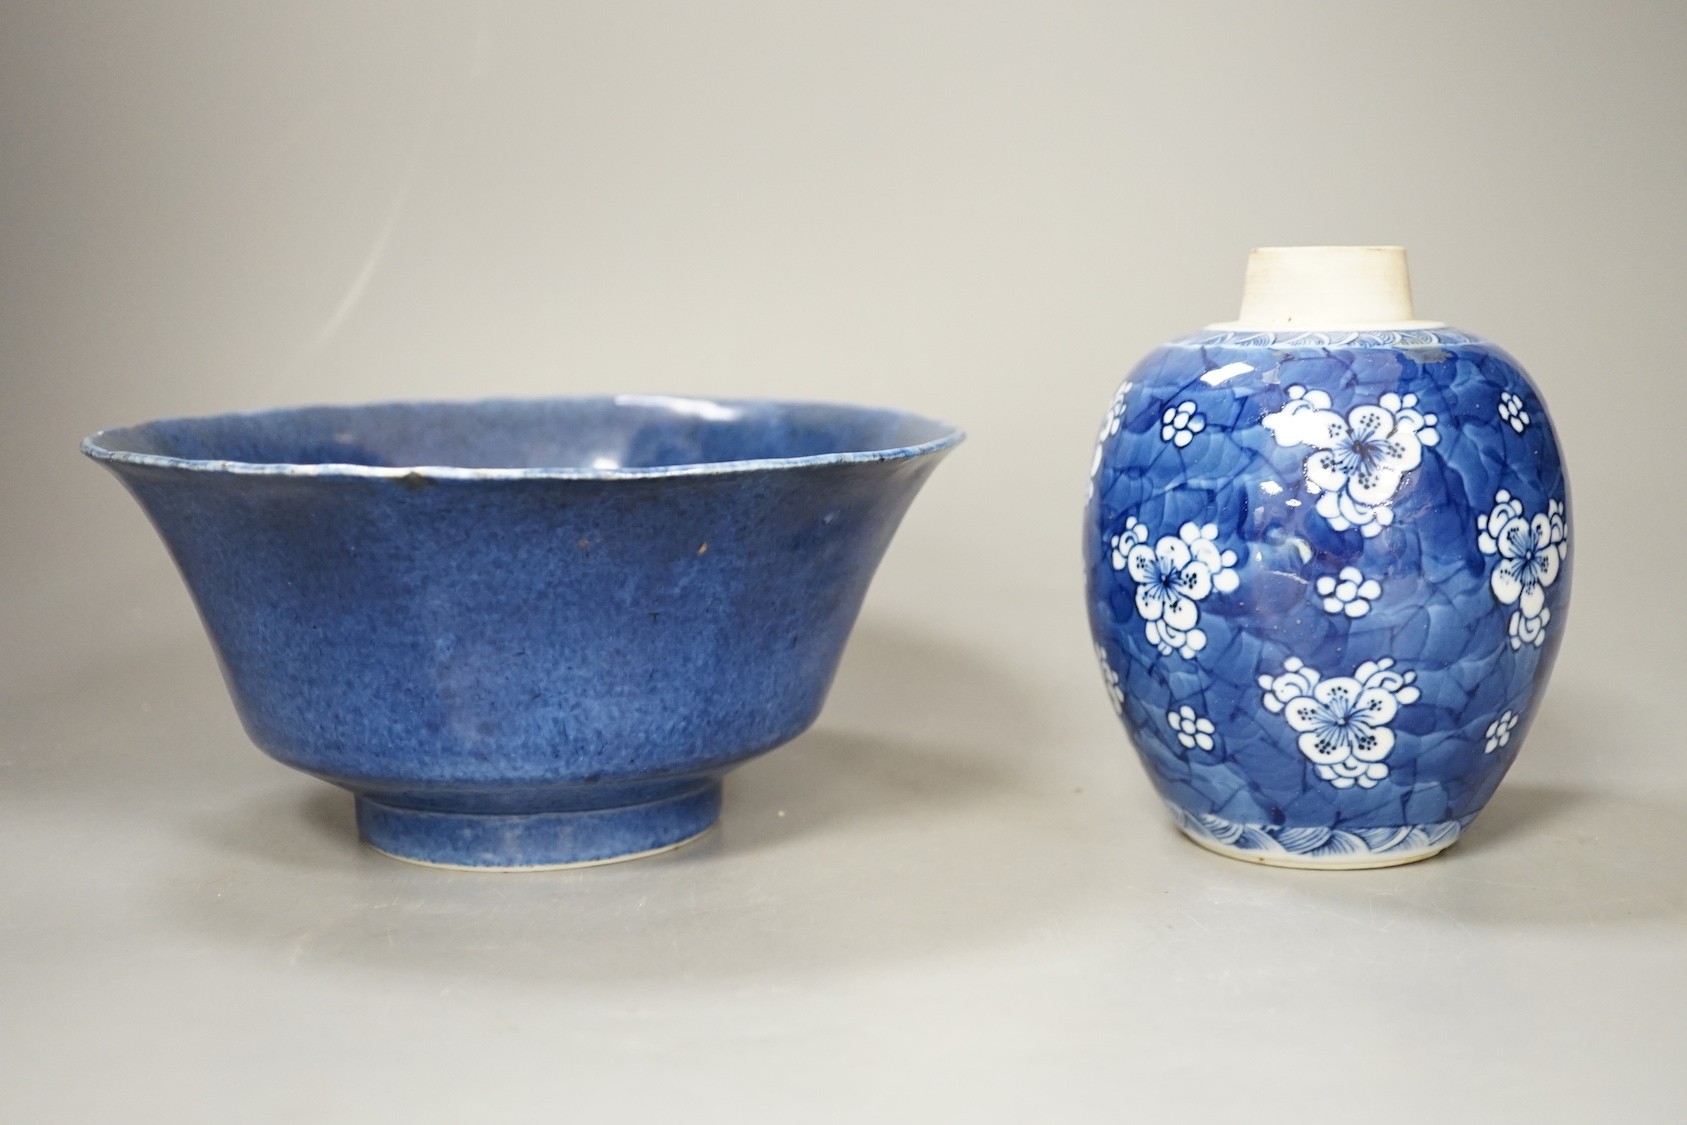 A Chinese powder blue bowl, early 18th century and a Chinese blue and white prunus jar - tallest 13cm